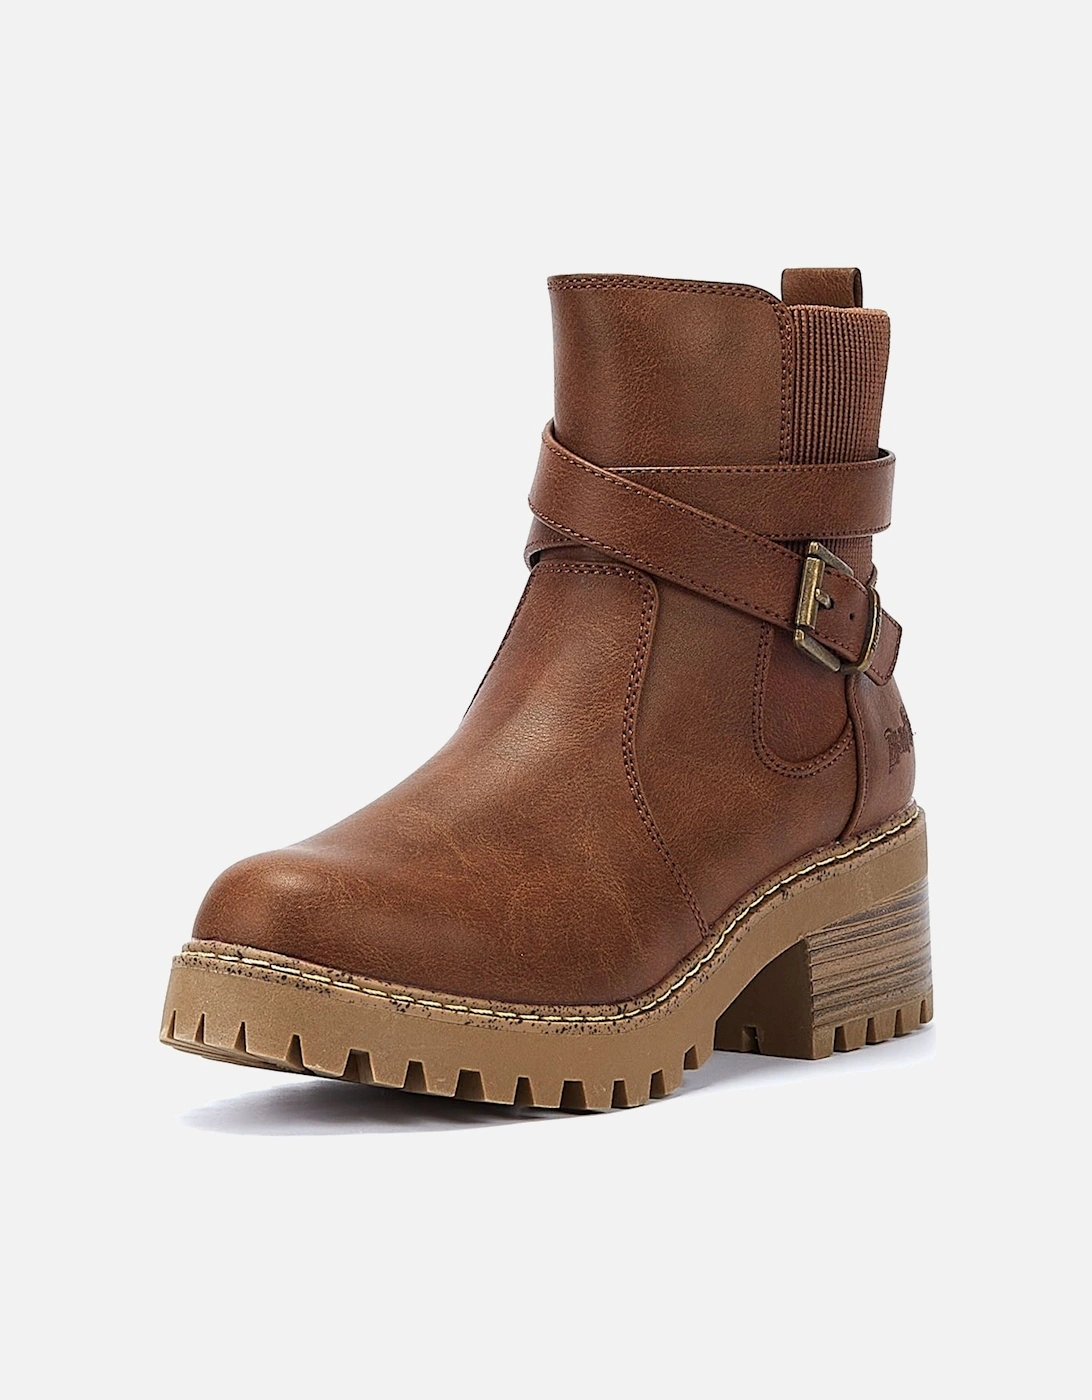 Lifted Women's Rust Boots